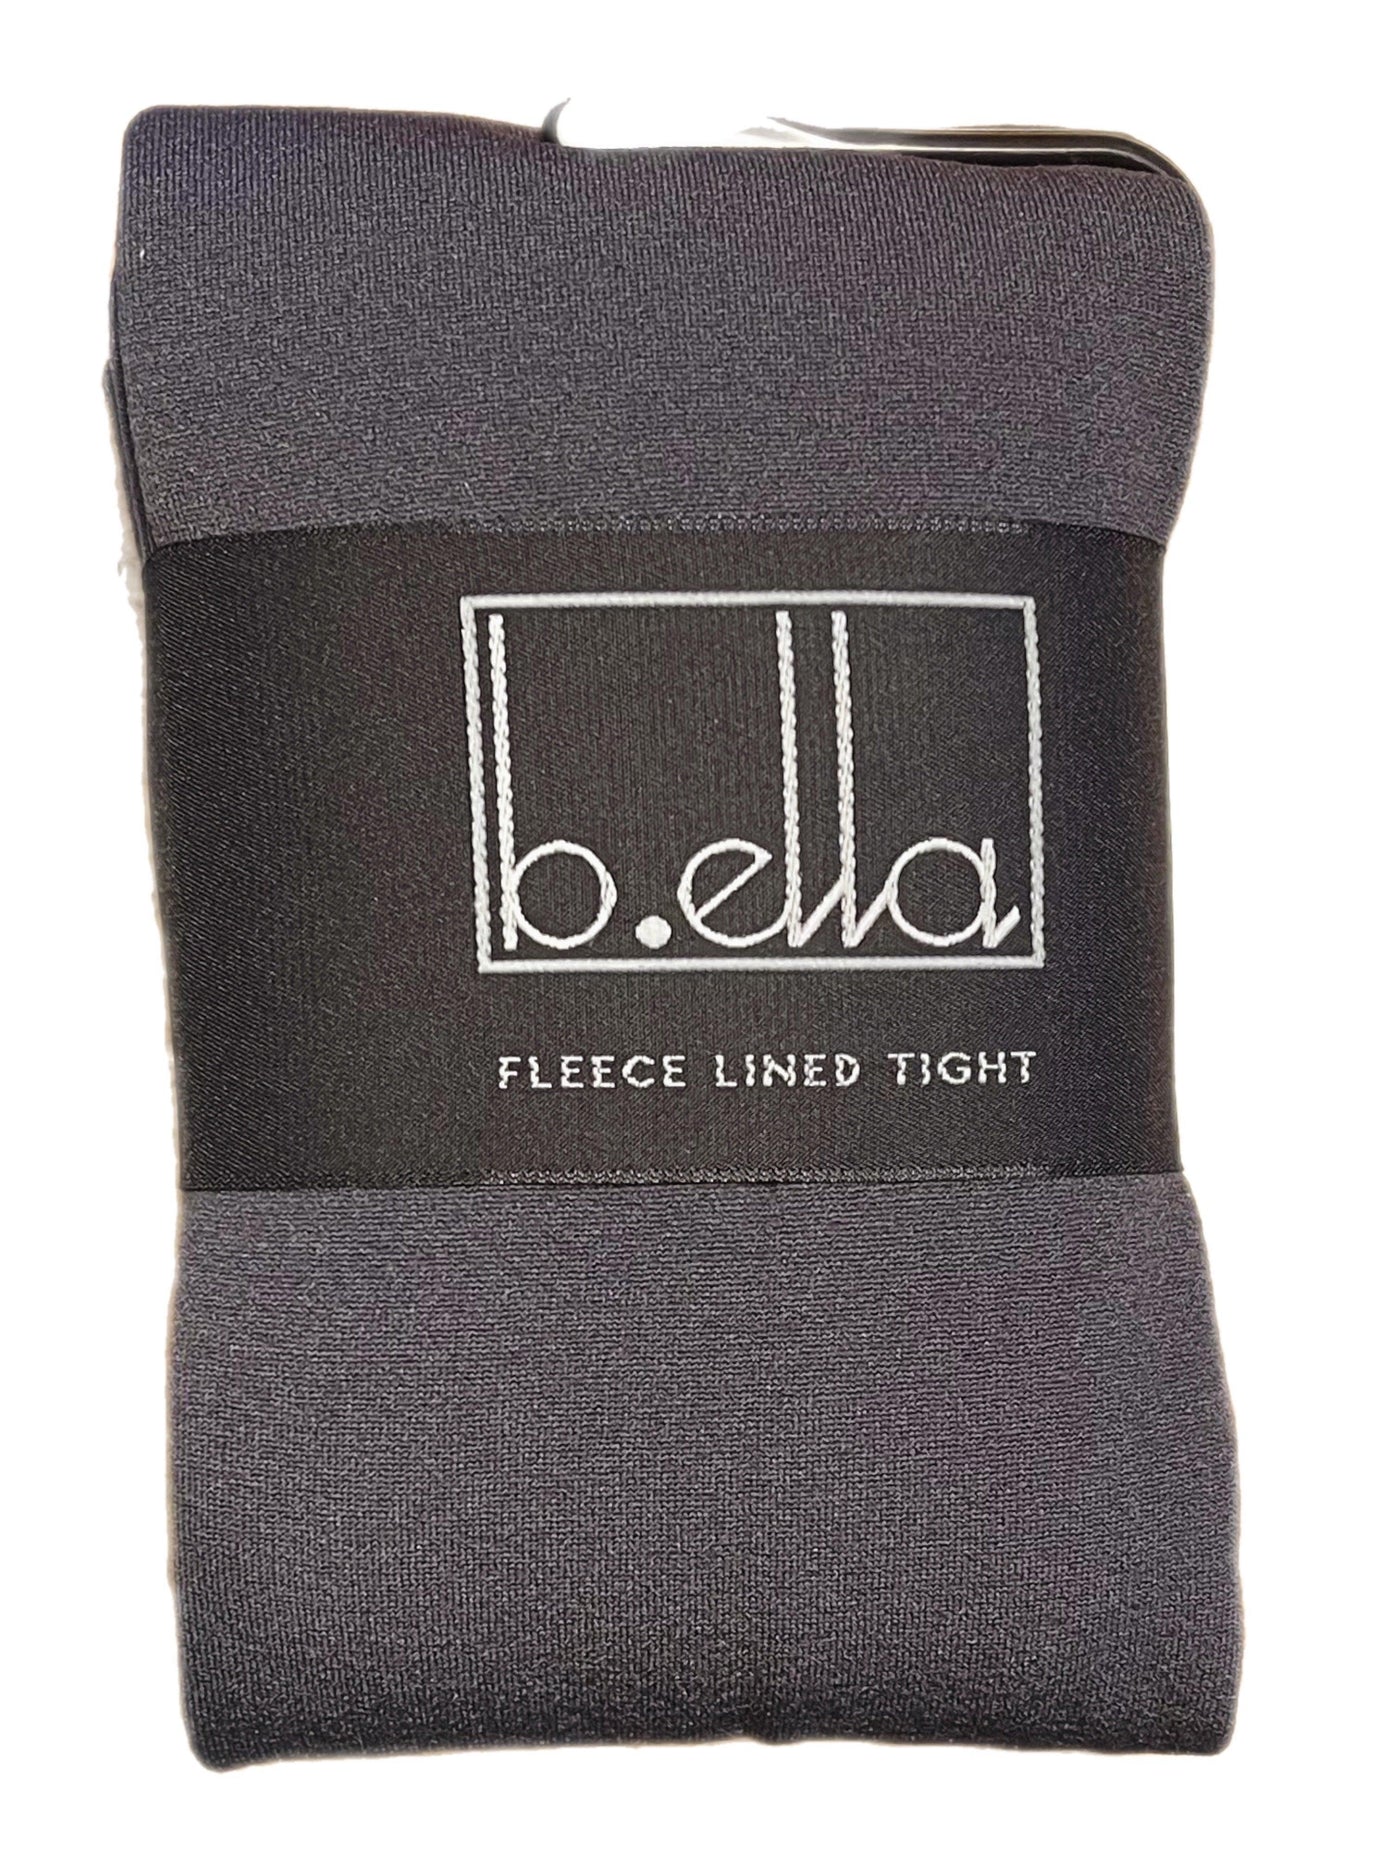 Thermo Fleece Lined, Women's Tights - B.ella - The Sock Monster